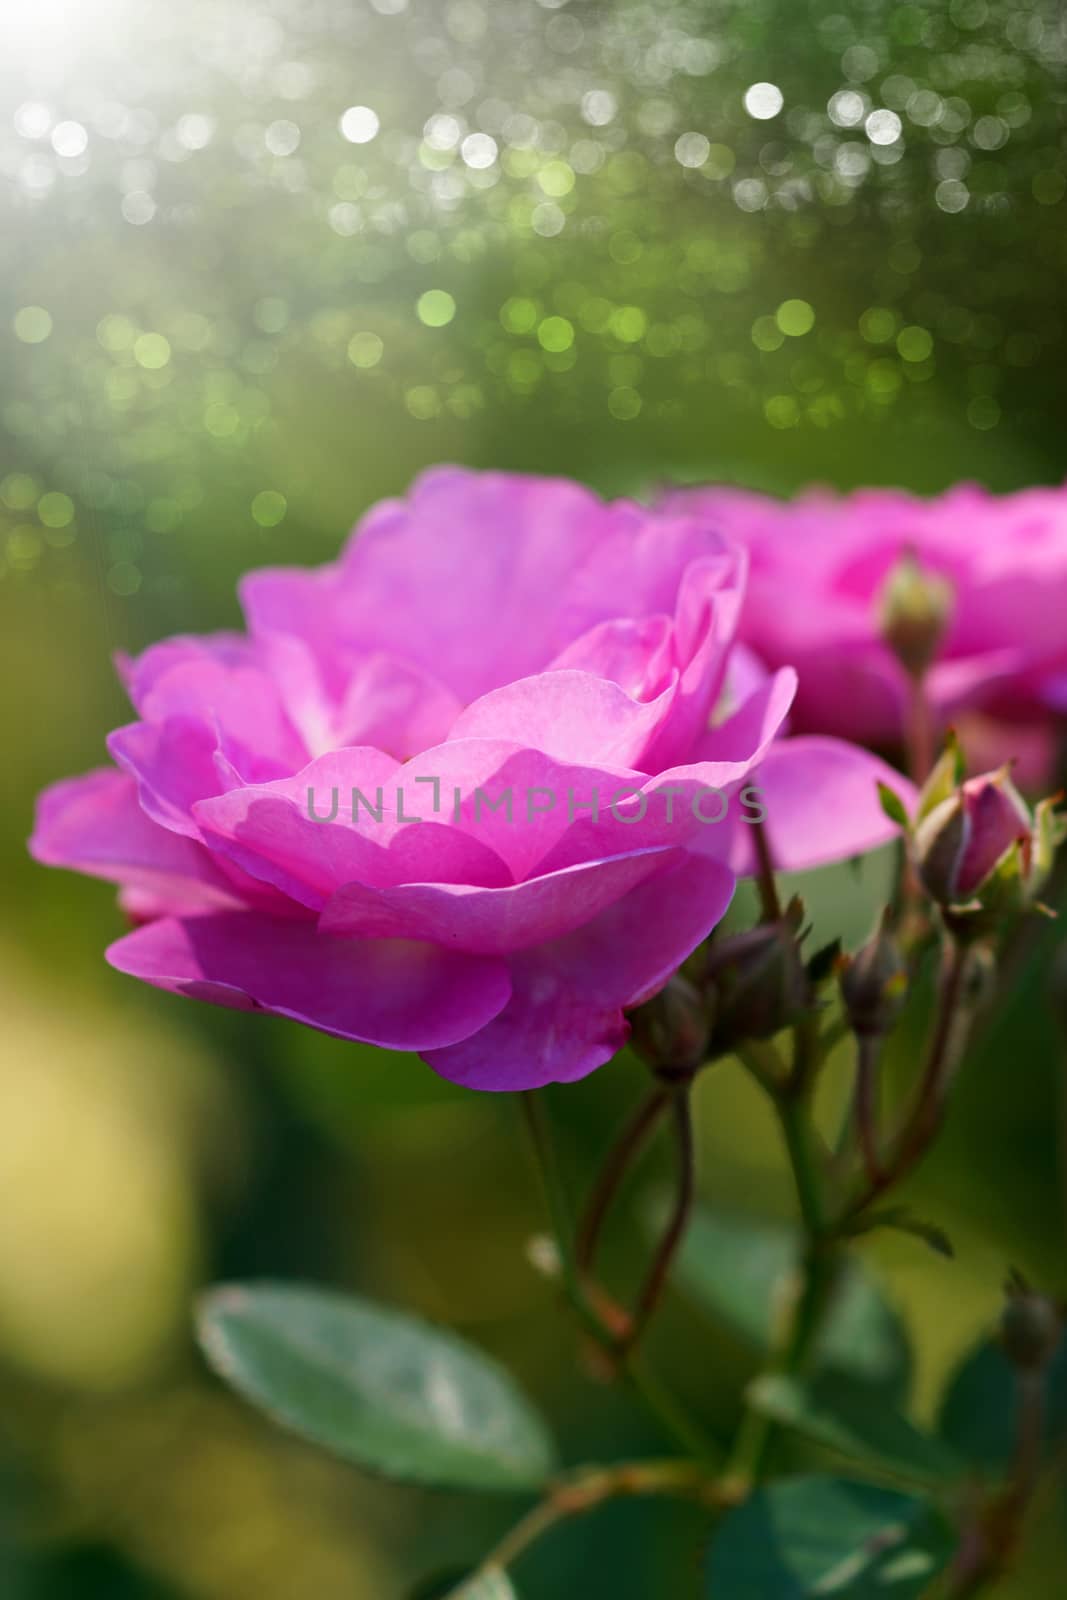 field of pink roses (Rosaceae) by Noppharat_th